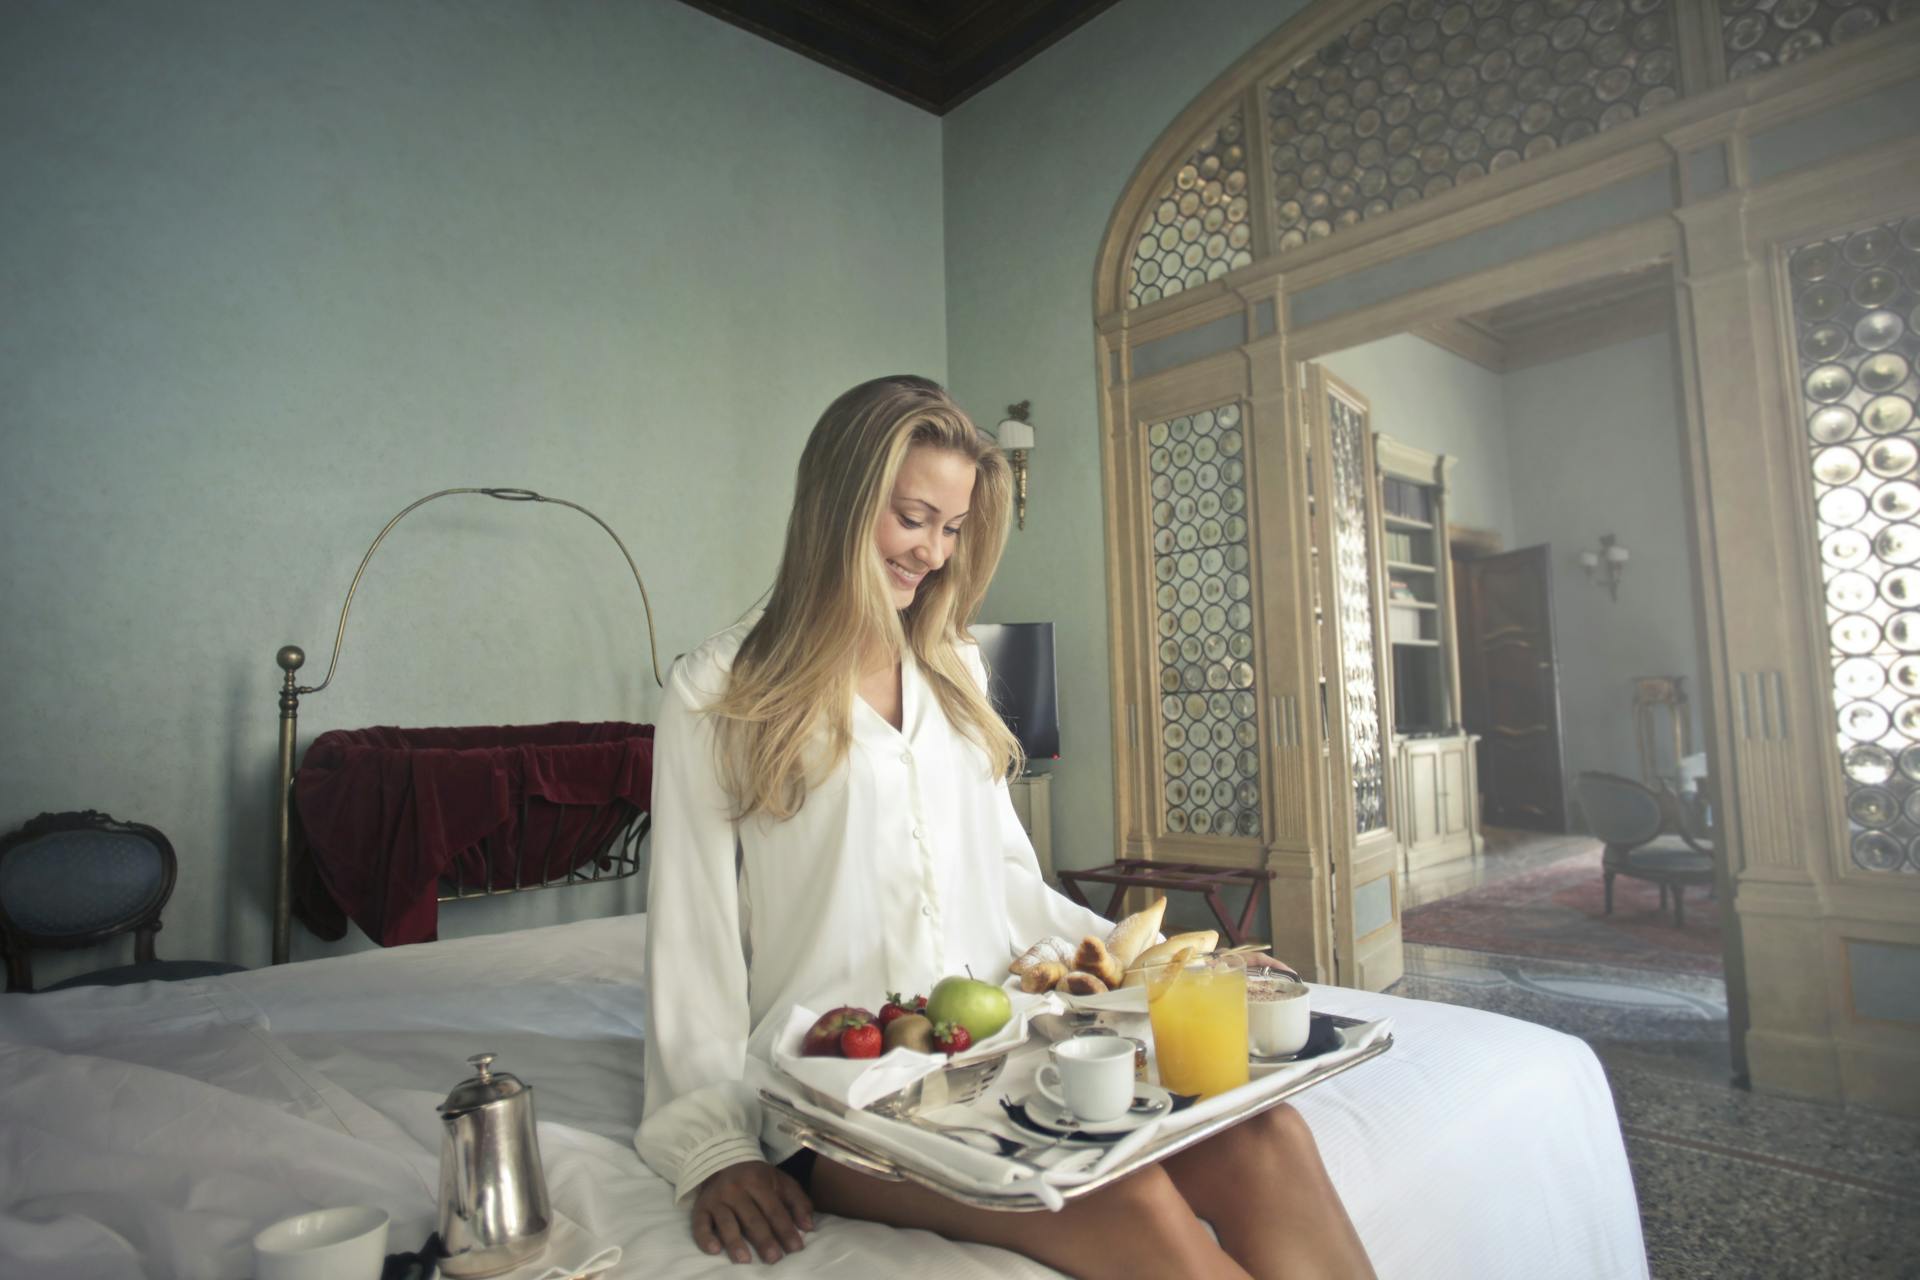 A cheerful woman with breakfast on a tray in a hotel bedroom | Source: Pexels